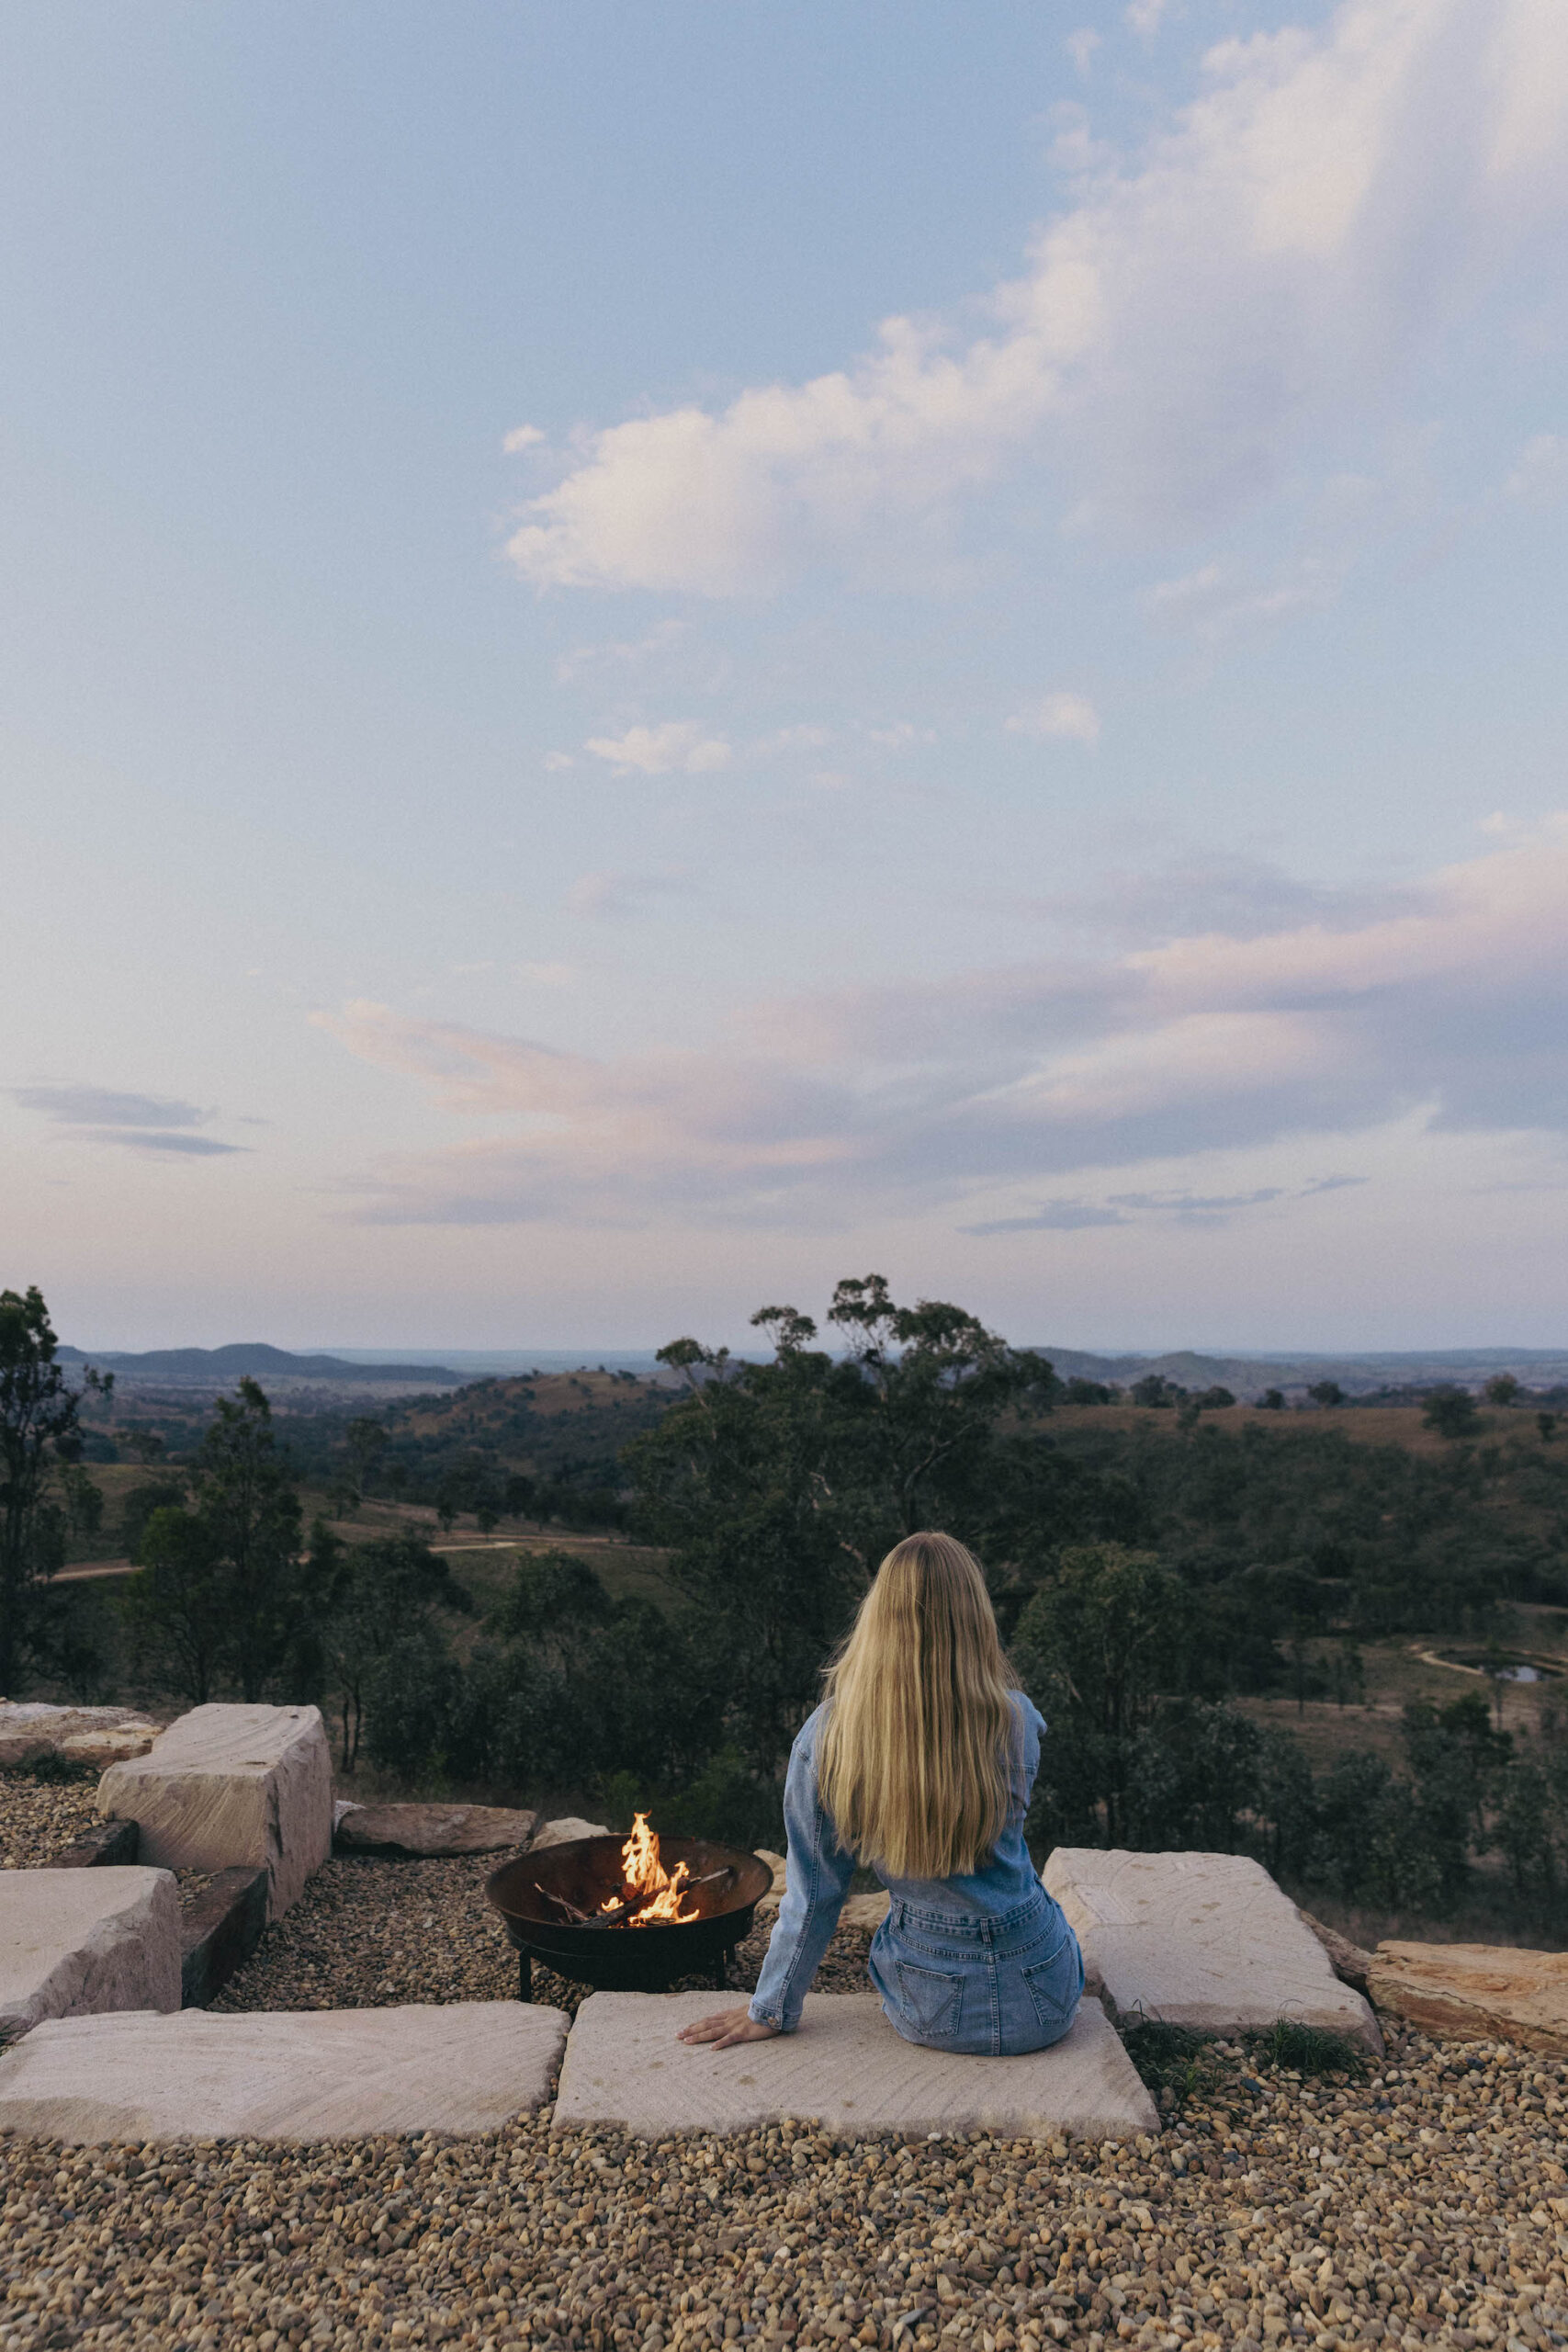 Sierra is an adults only romantic glamping experience for visitors to regional NSW. For family and dog friendly options closer to Sydney, try a Tandara glamping tent retreat, the safari adventure at Zoofari Lodge, a trip to Faraway Domes, or the Roar and Snore overnight experience at Taronga Zoo.